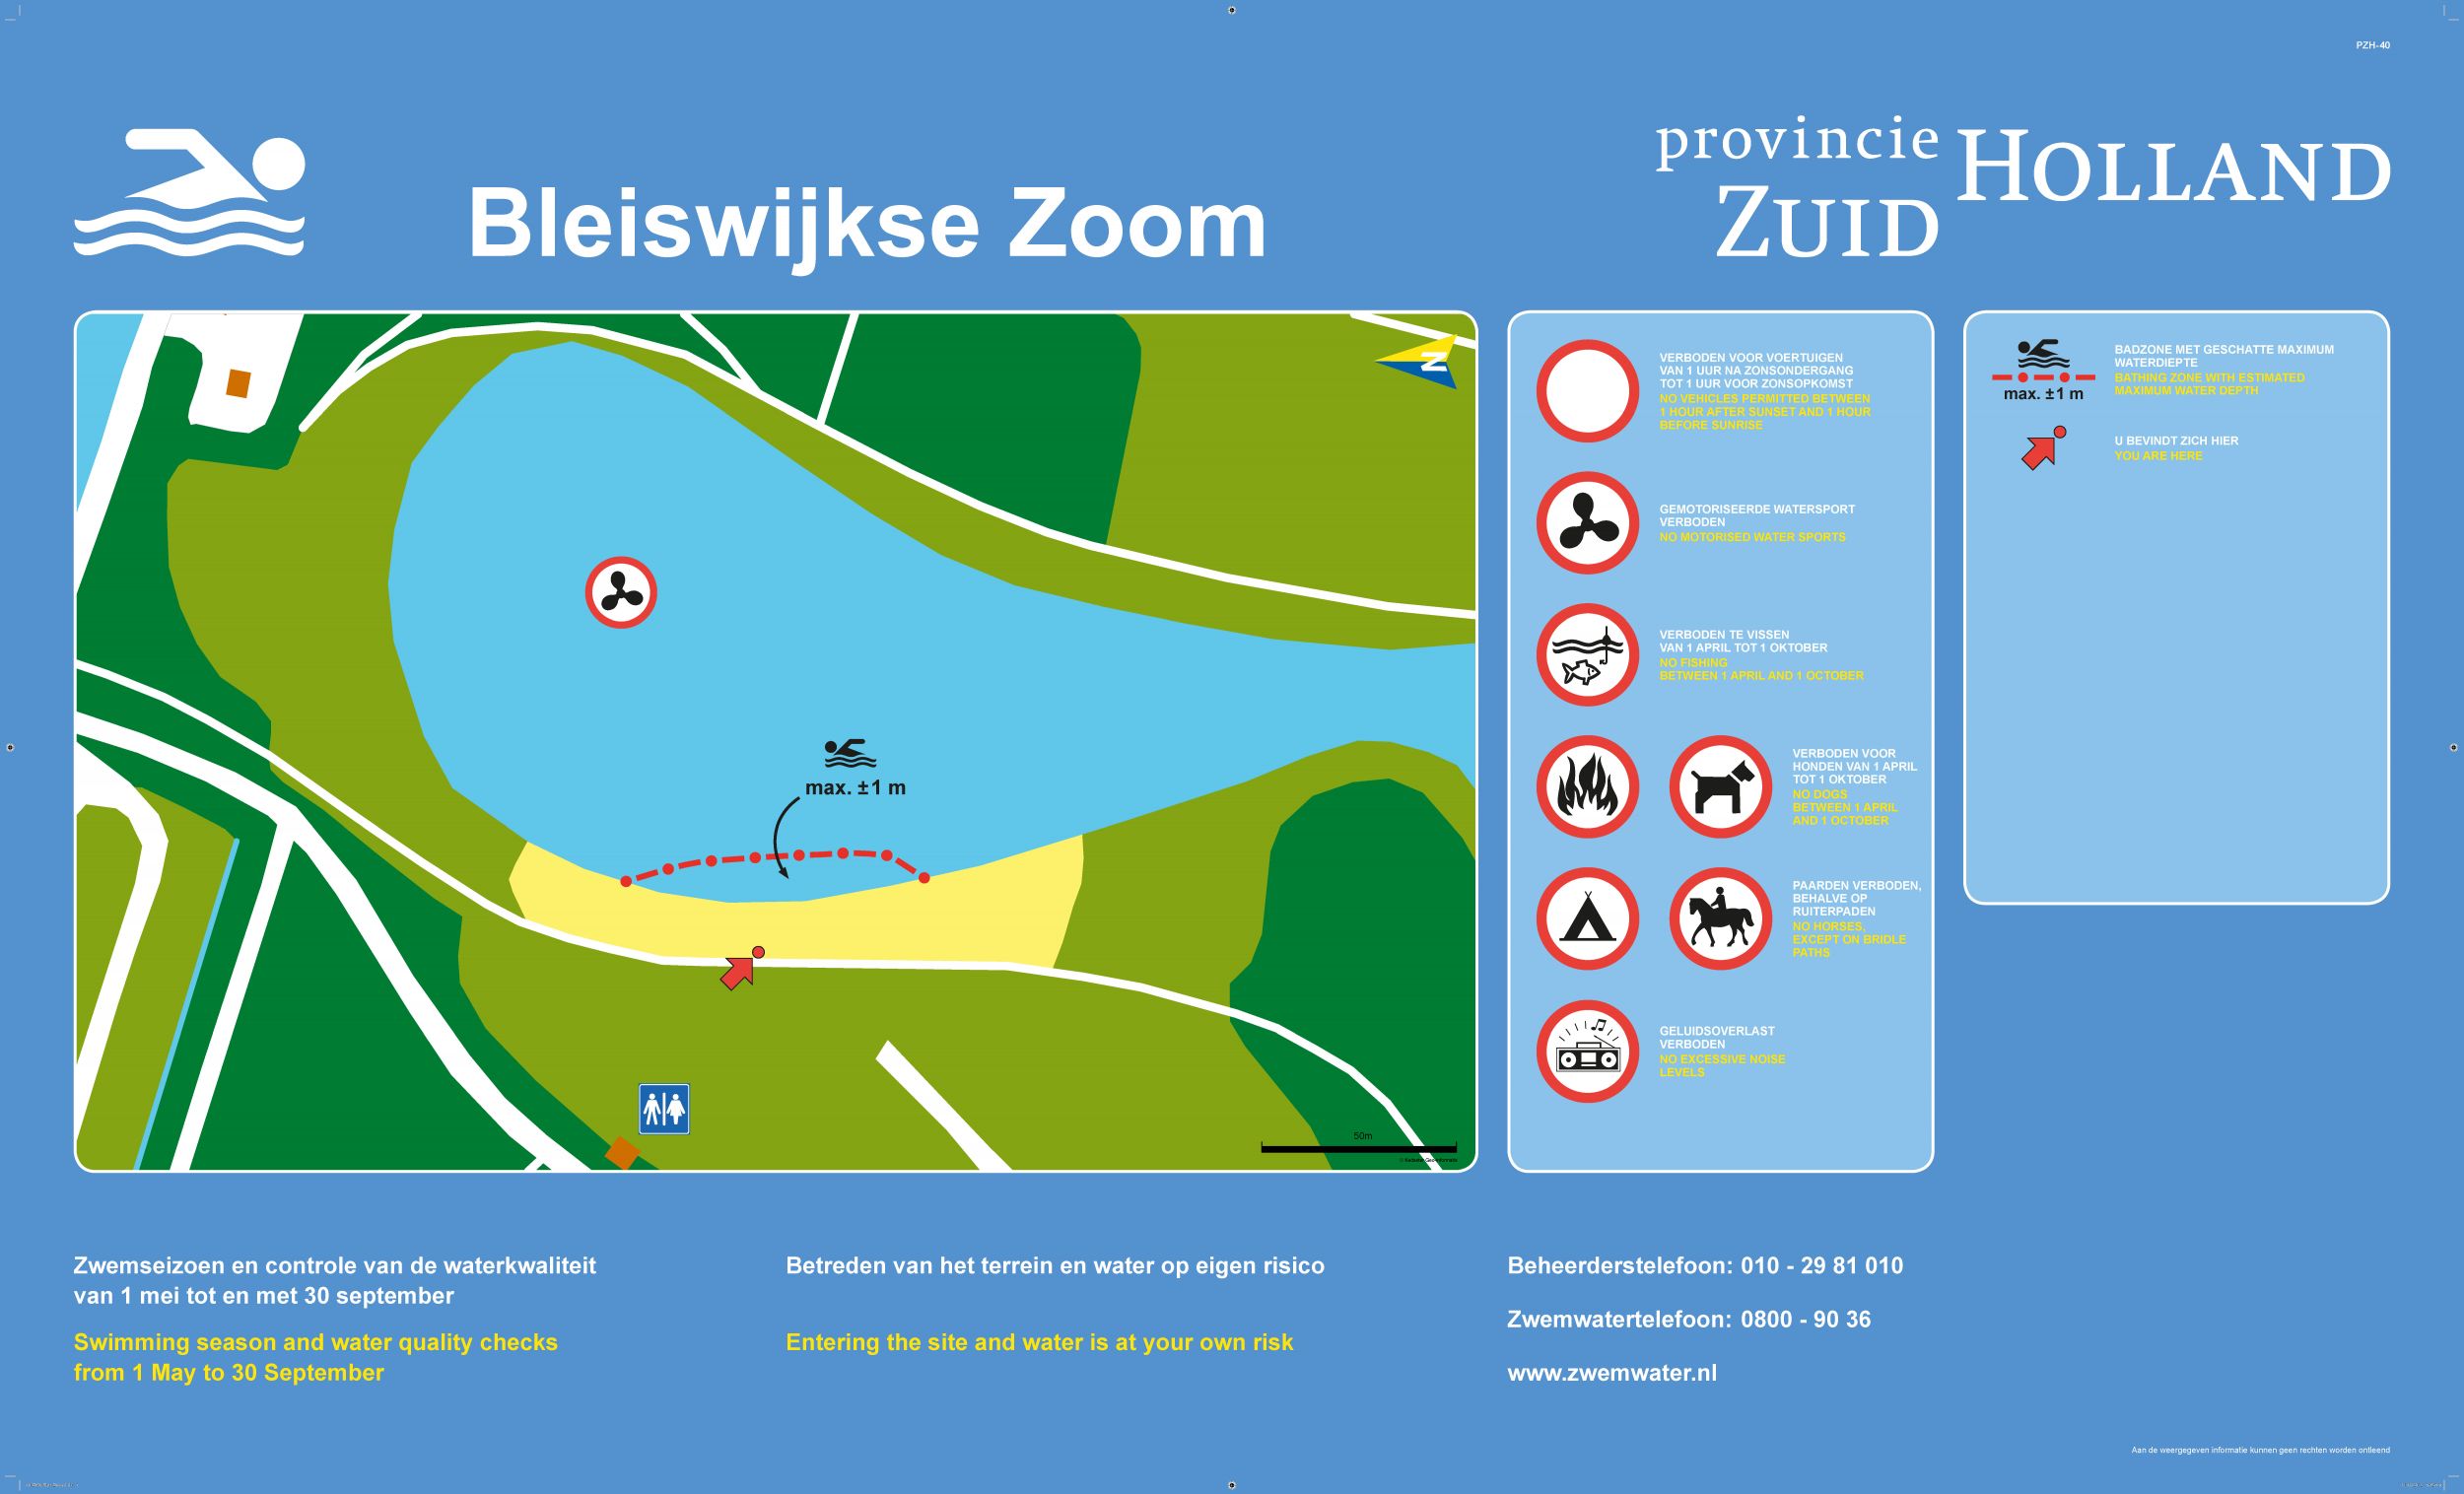 The information board at the swimming location Bleiswijkse Zoom